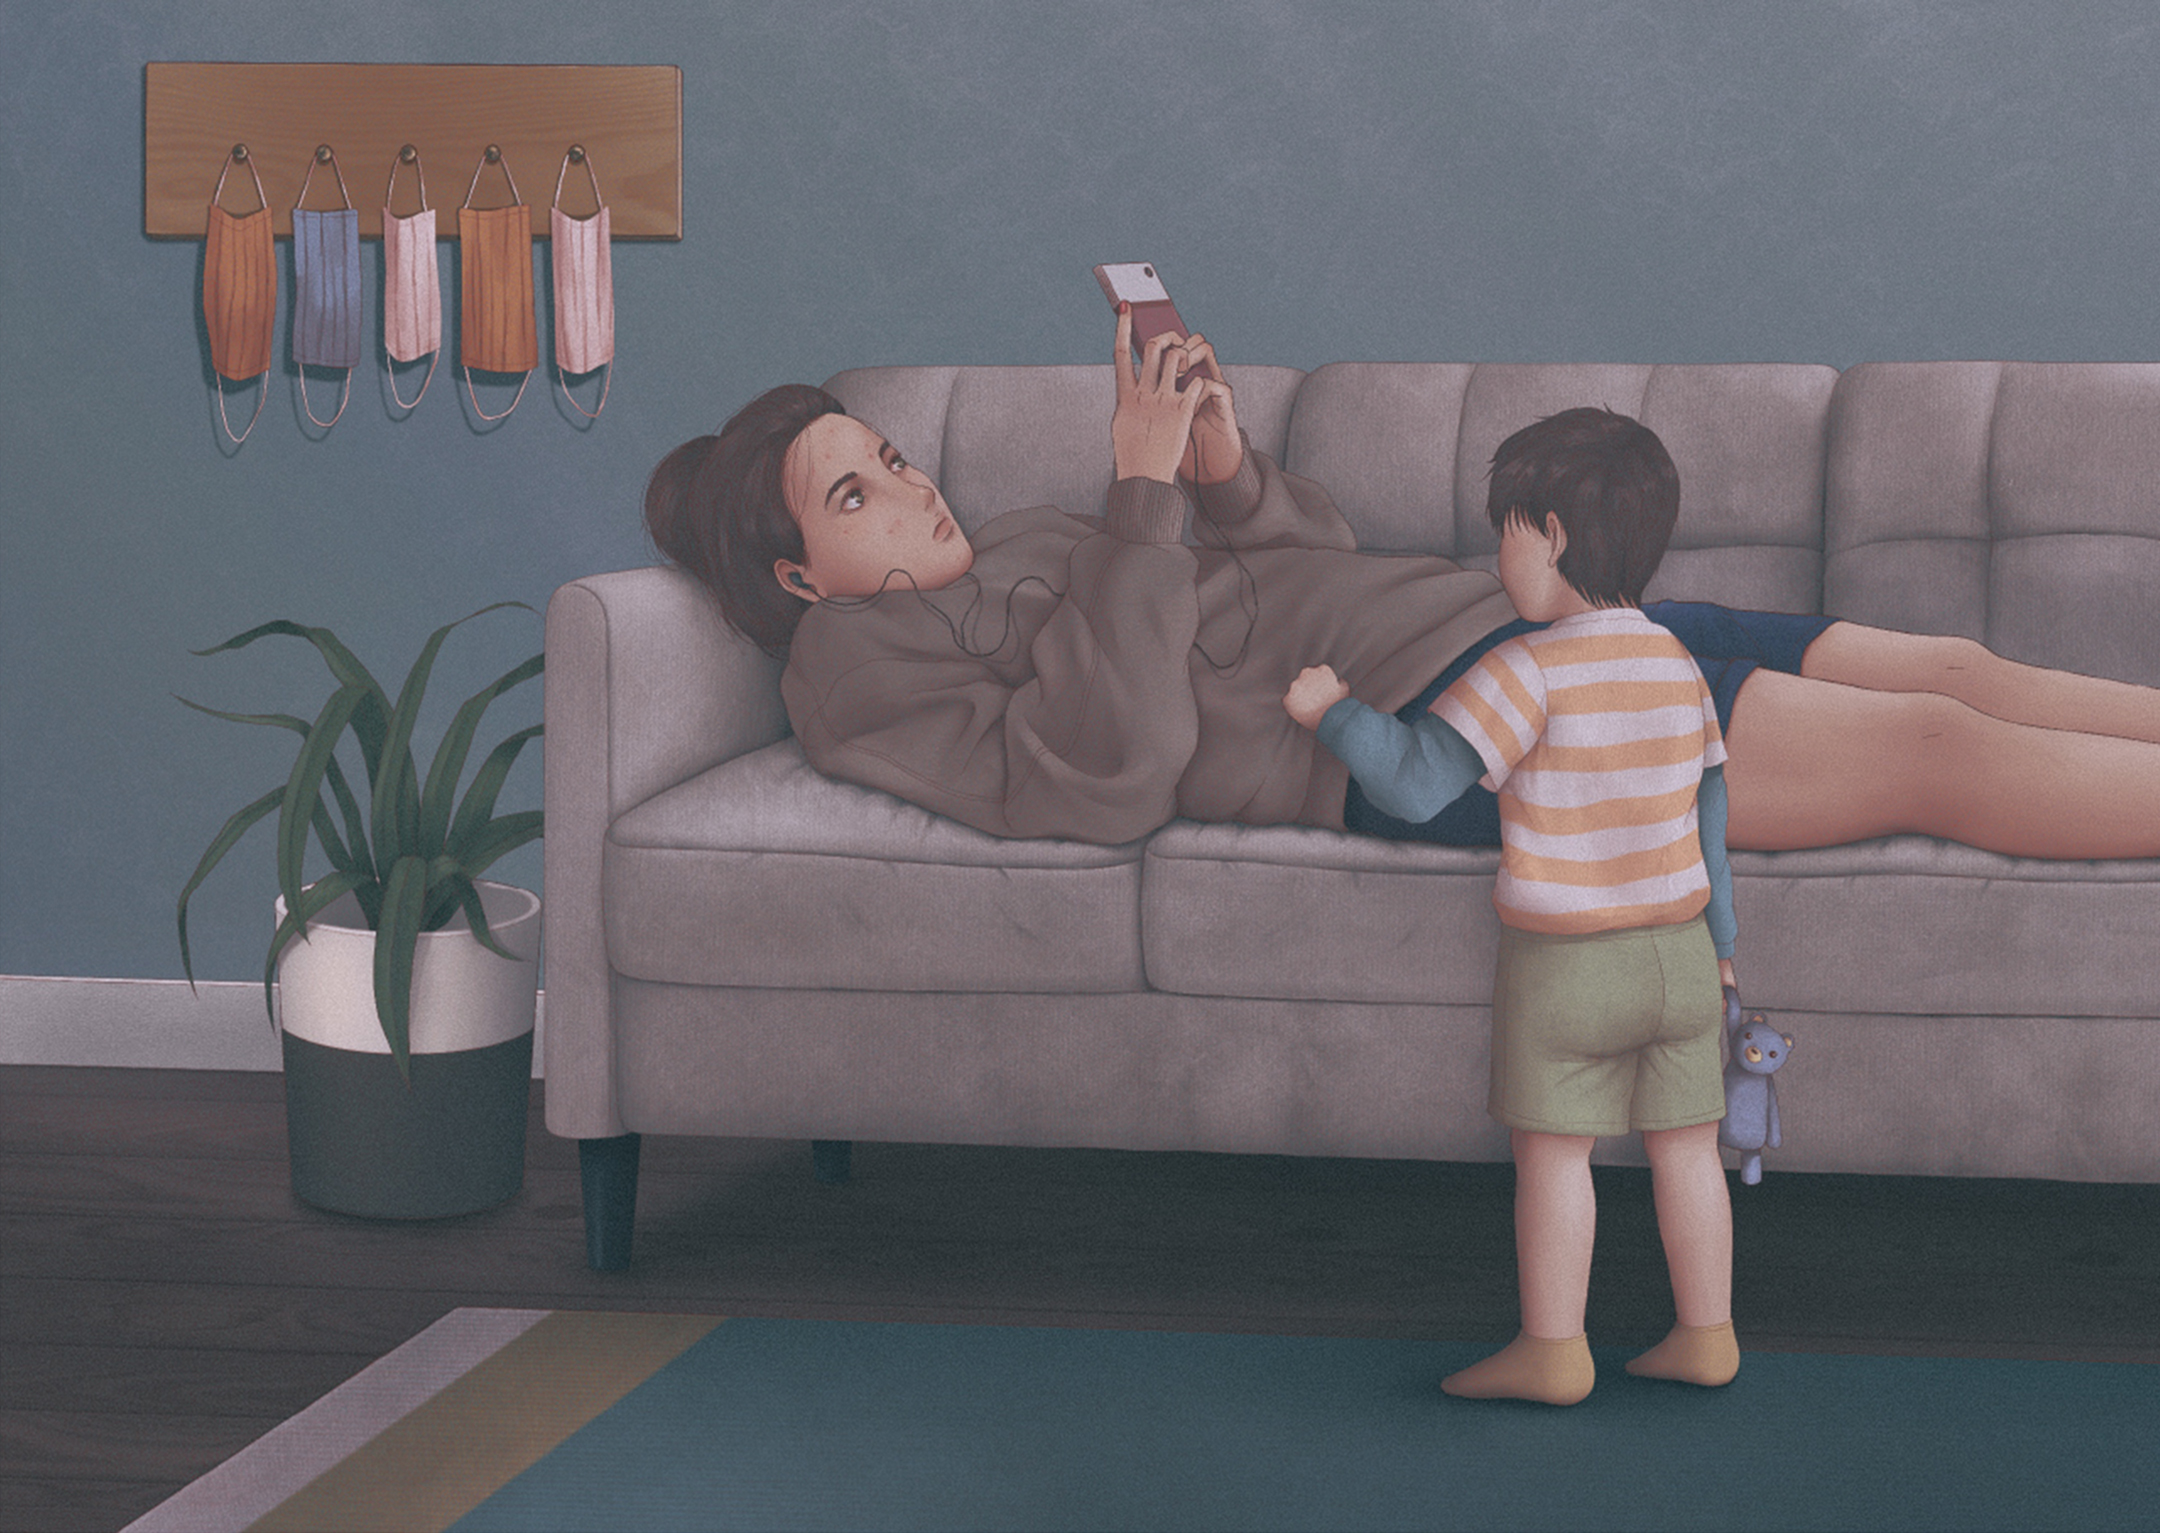 Illustration of a young woman laying on a couch looking at a phone while a young boy tries to get her attention